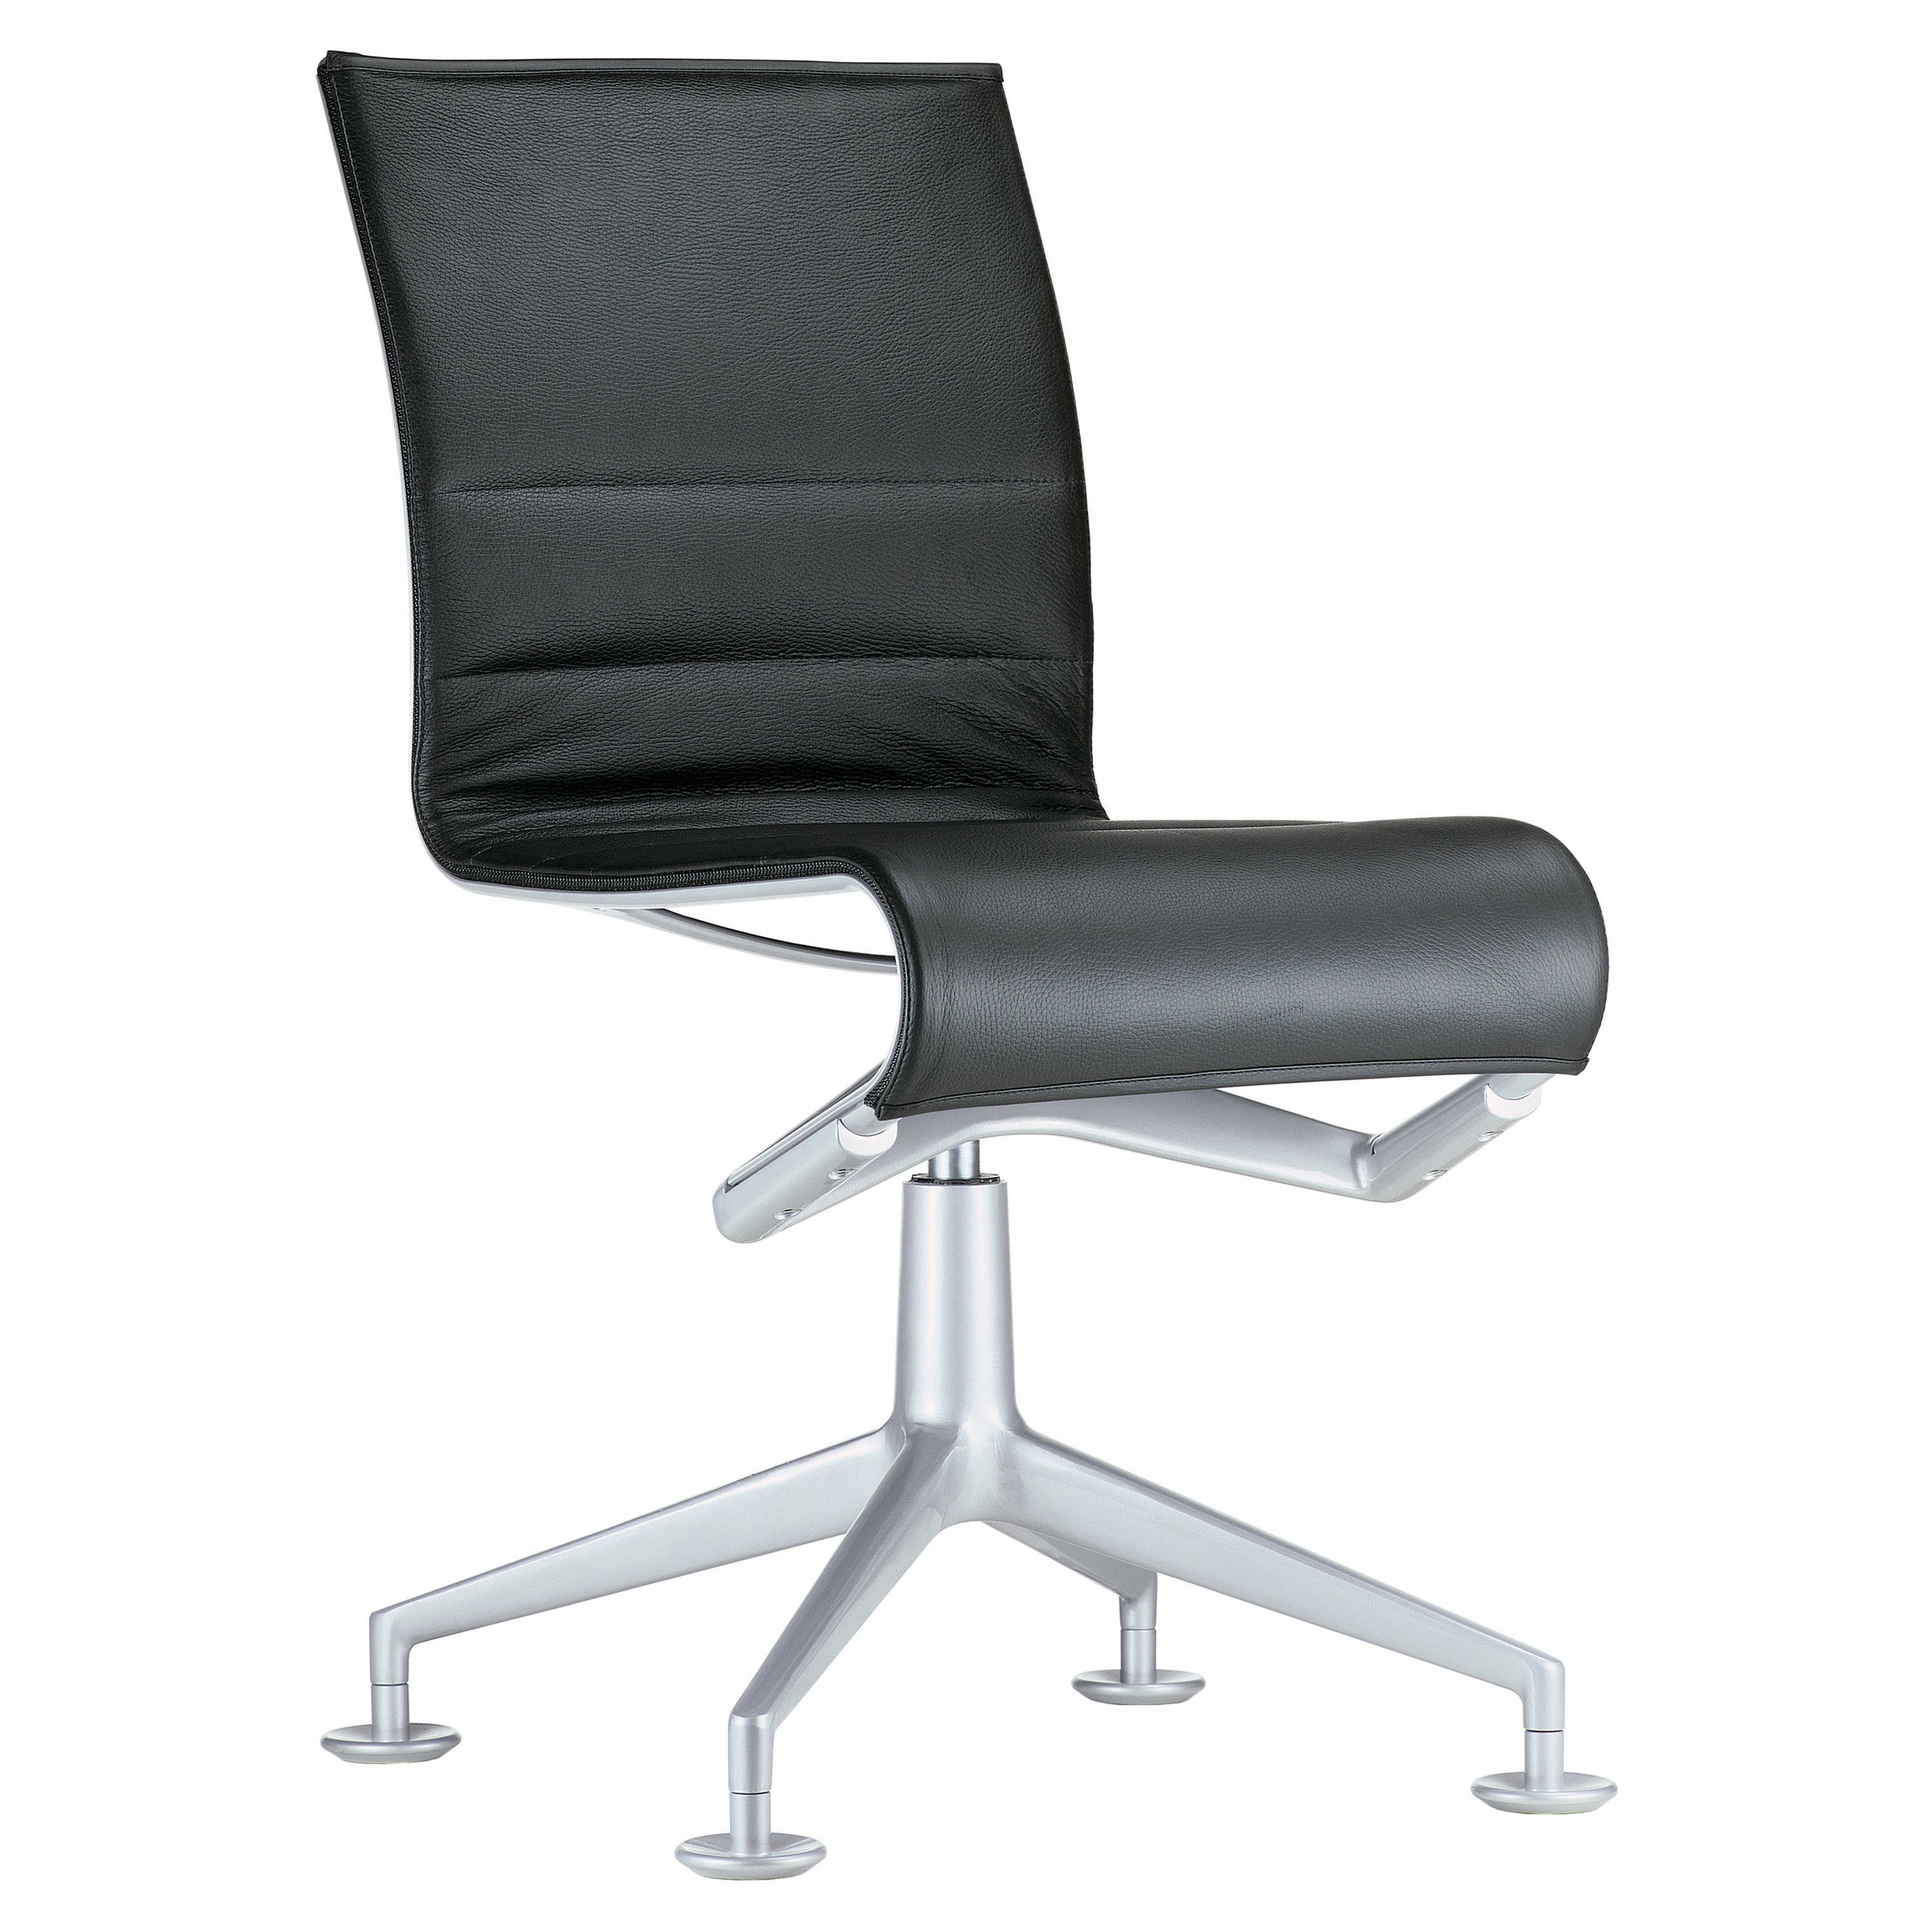 Alias 436 Meetingframe 44 Chair in Black Seat with Grey Lacquered Aluminum Frame For Sale